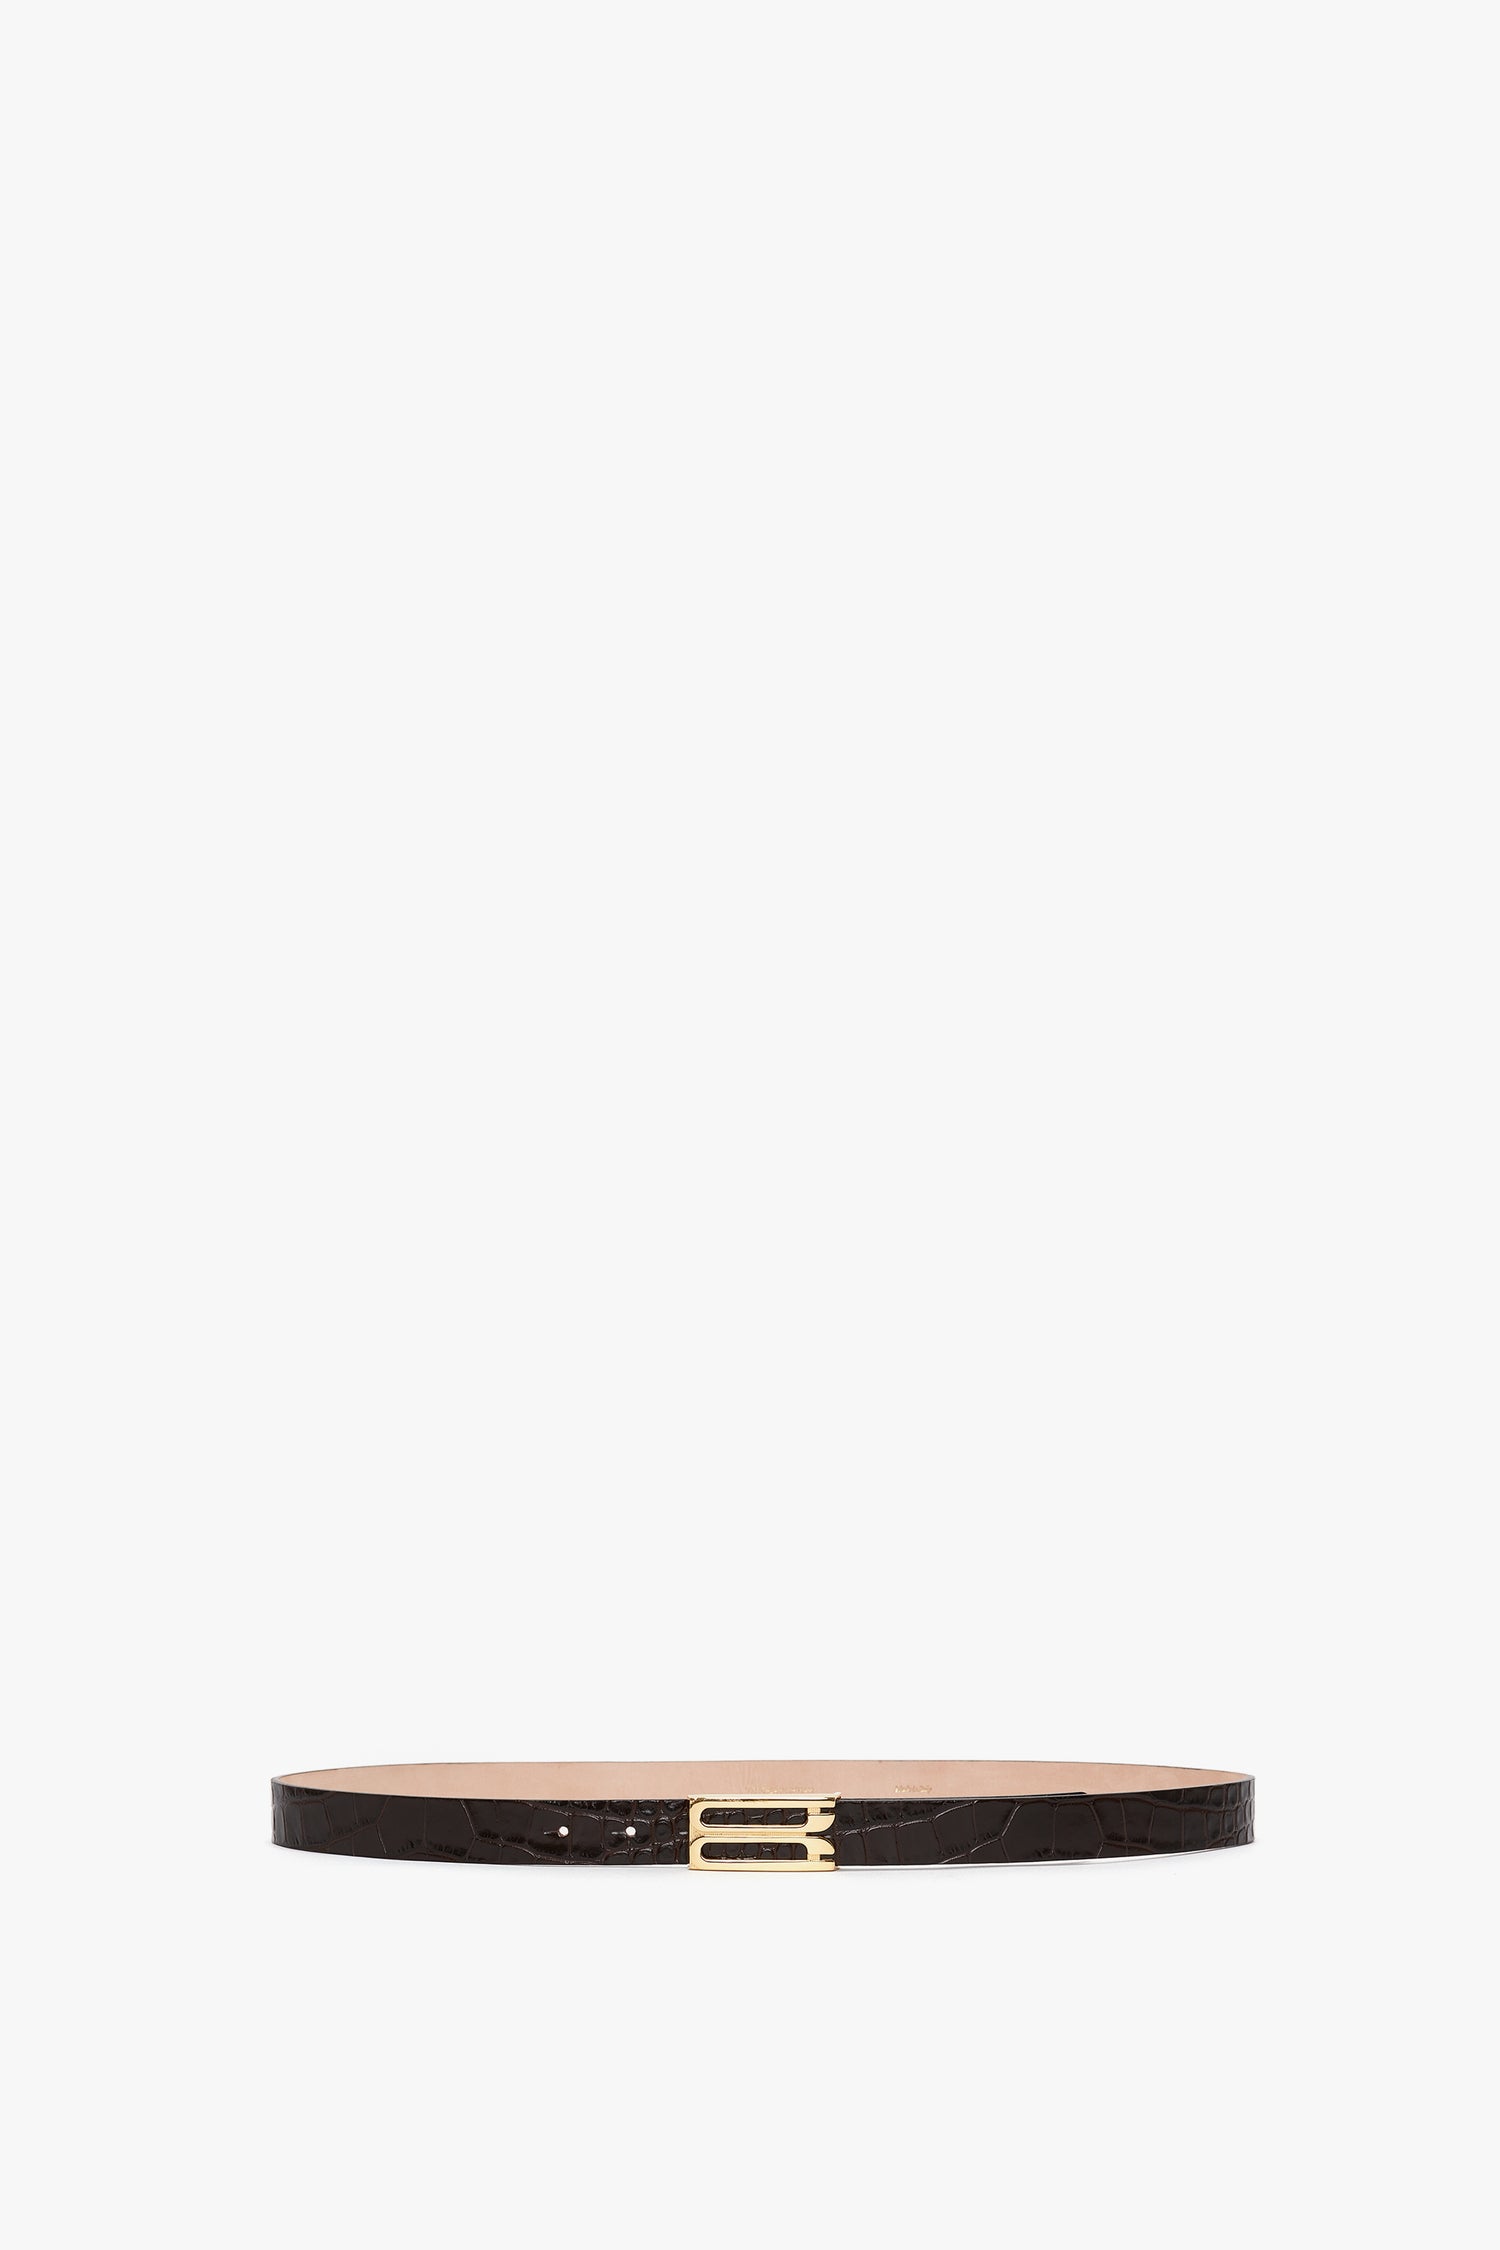 A thin, dark brown croc-embossed calf leather Victoria Beckham Frame Belt In Espresso Croc Embossed Calf Leather with a gold rectangular buckle, displayed against a plain white background.